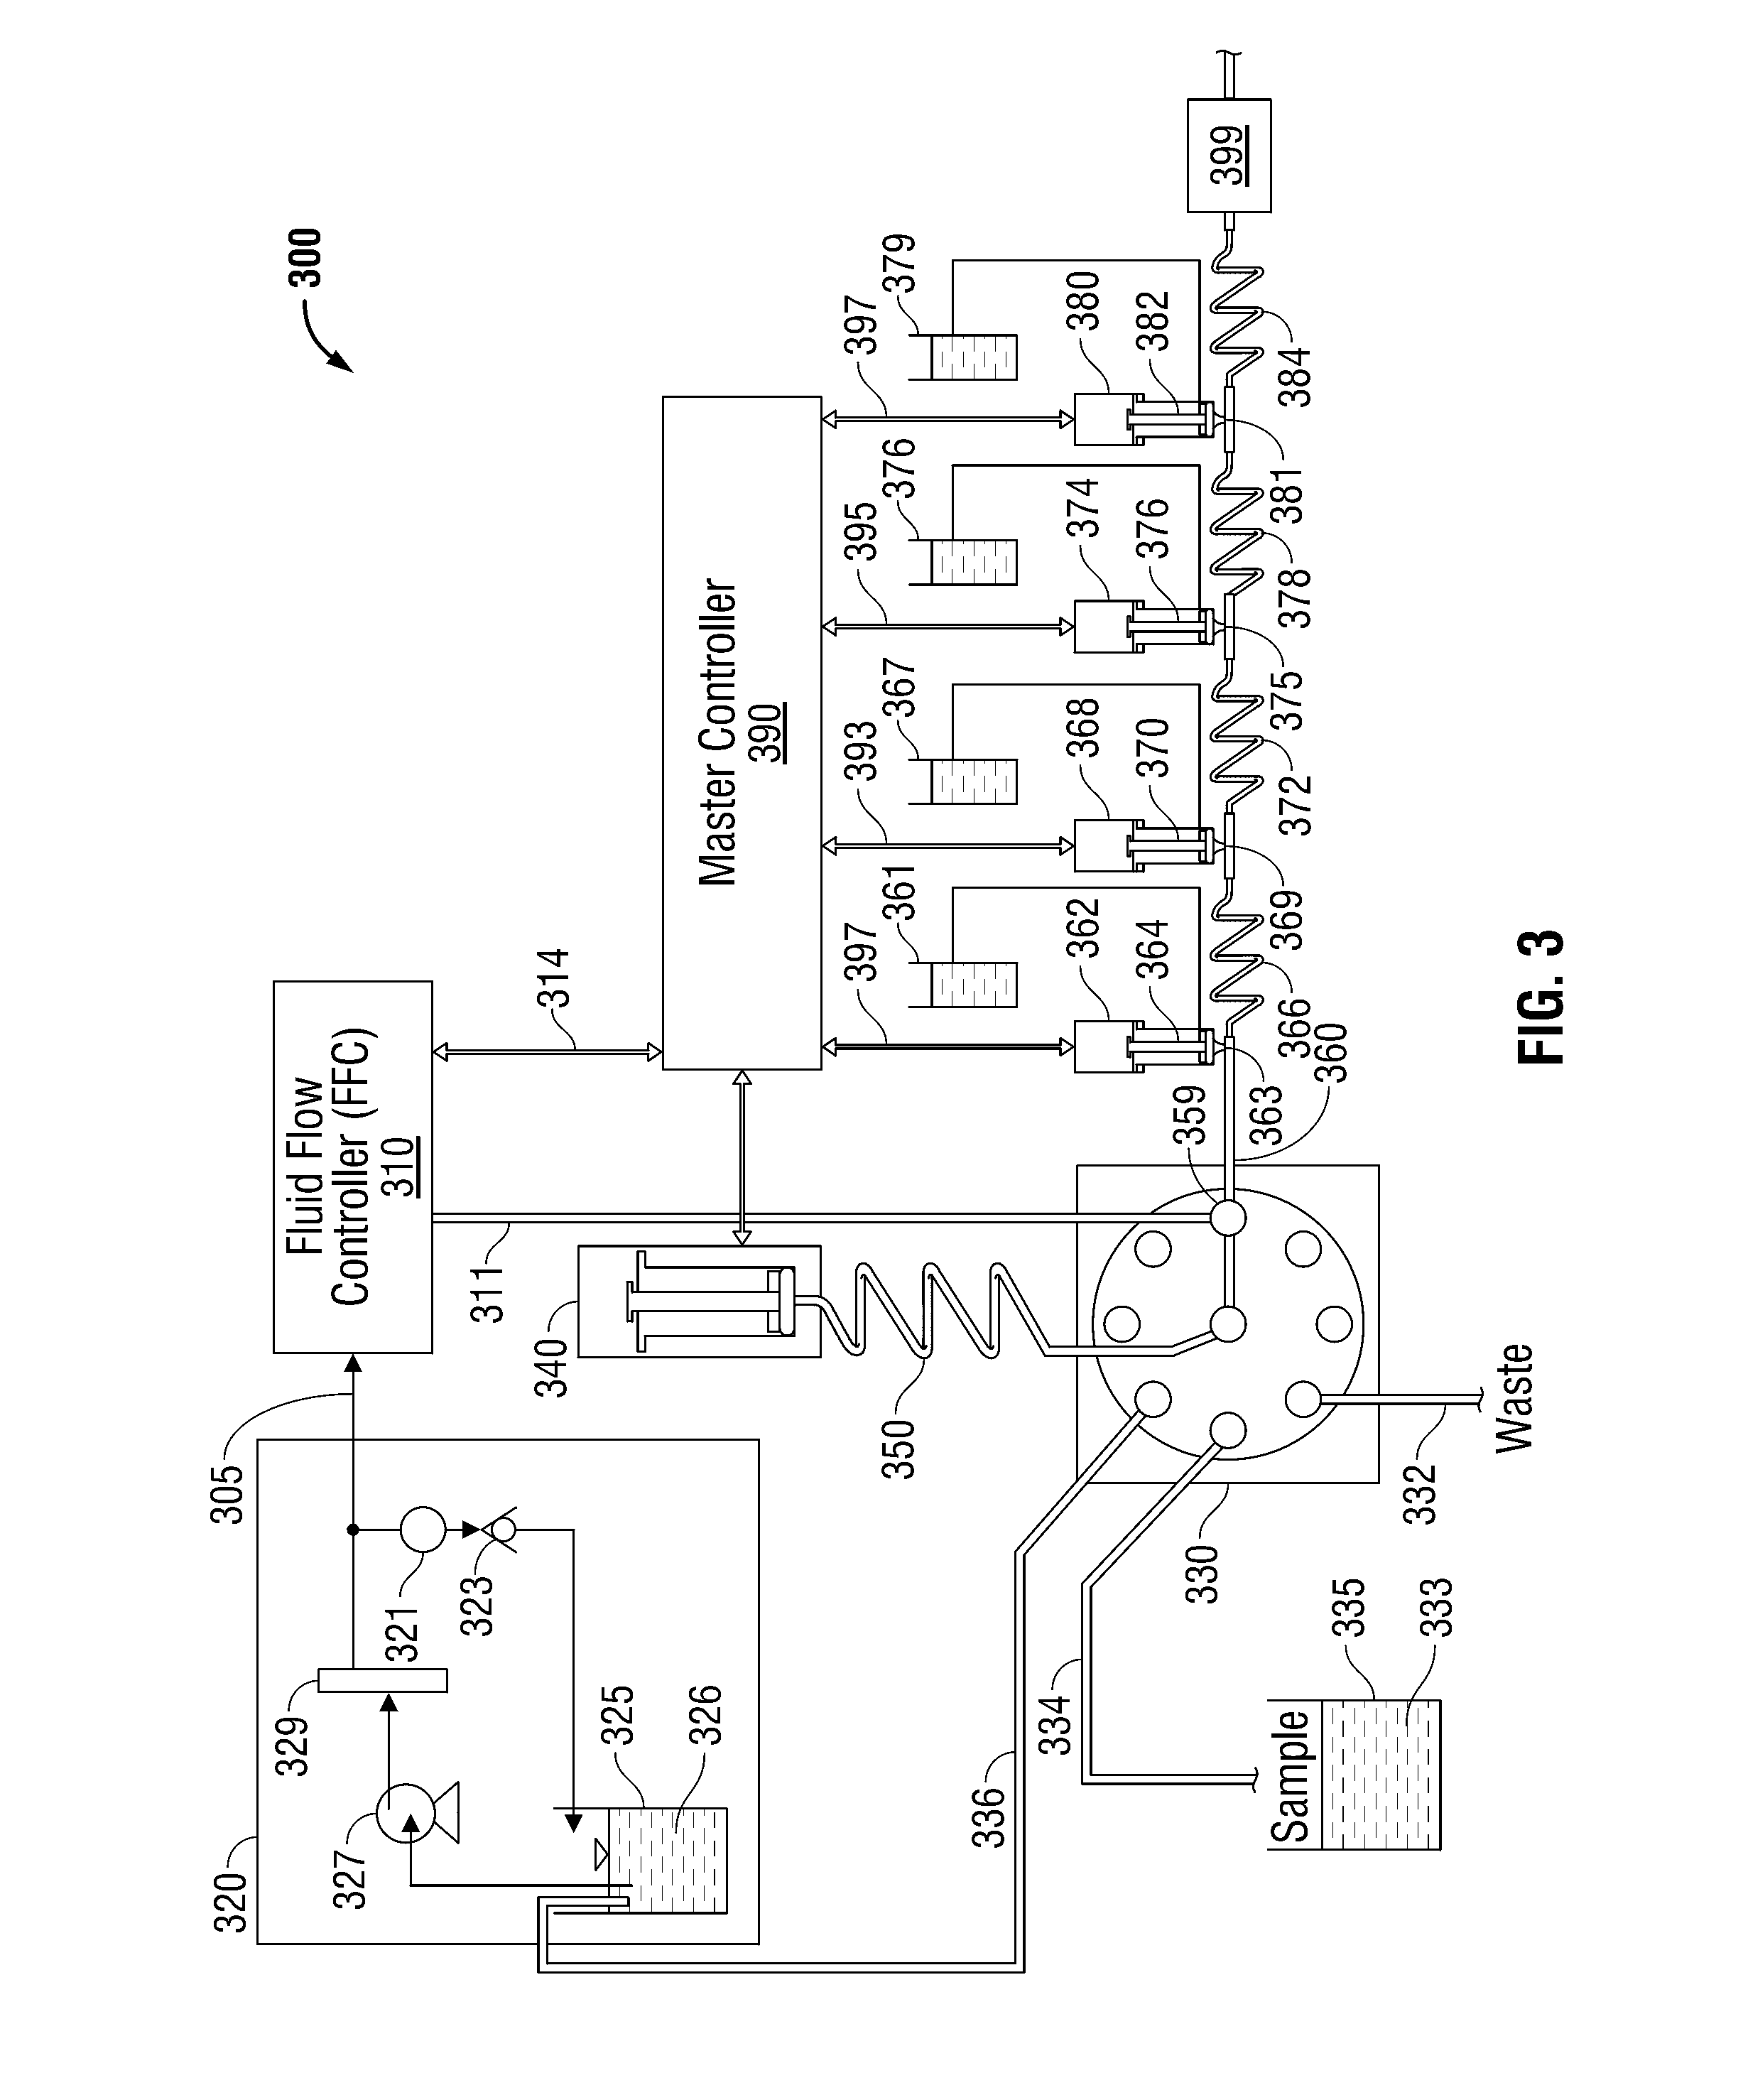 System and Method for Regulating Flow in Fluidic Devices